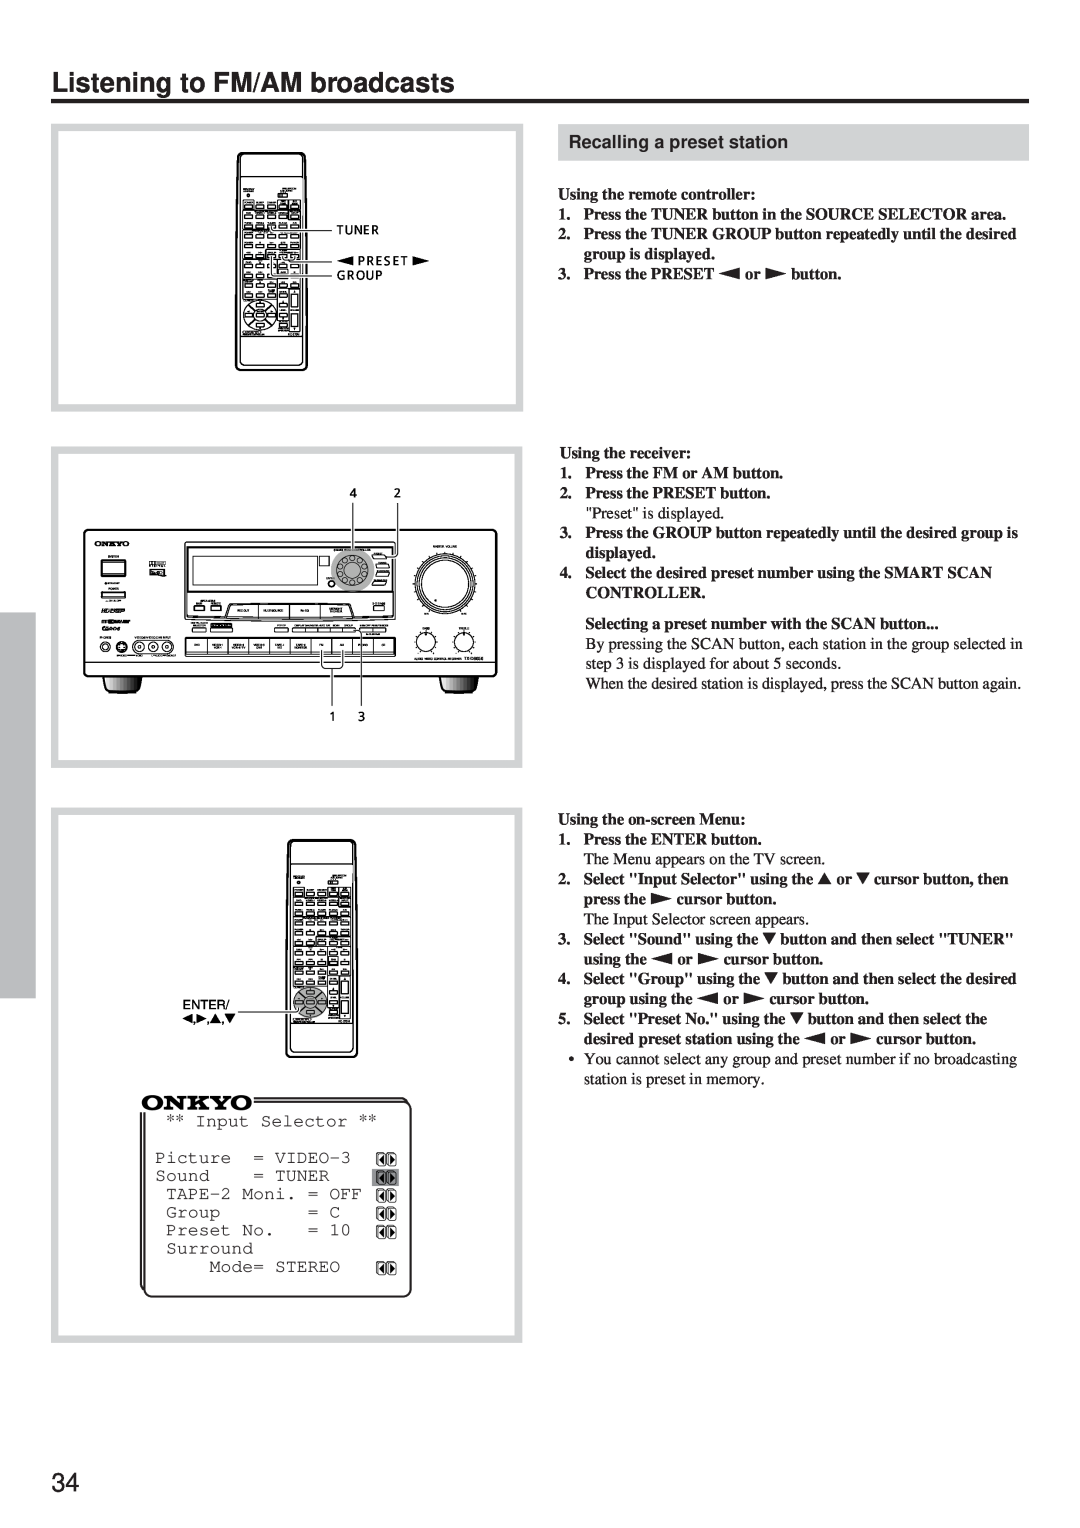 Onkyo TX-DS656 Listening to FM/AM broadcasts, Recalling a preset station, Input Selector Picture = VIDEO-3 Sound = TUNER 